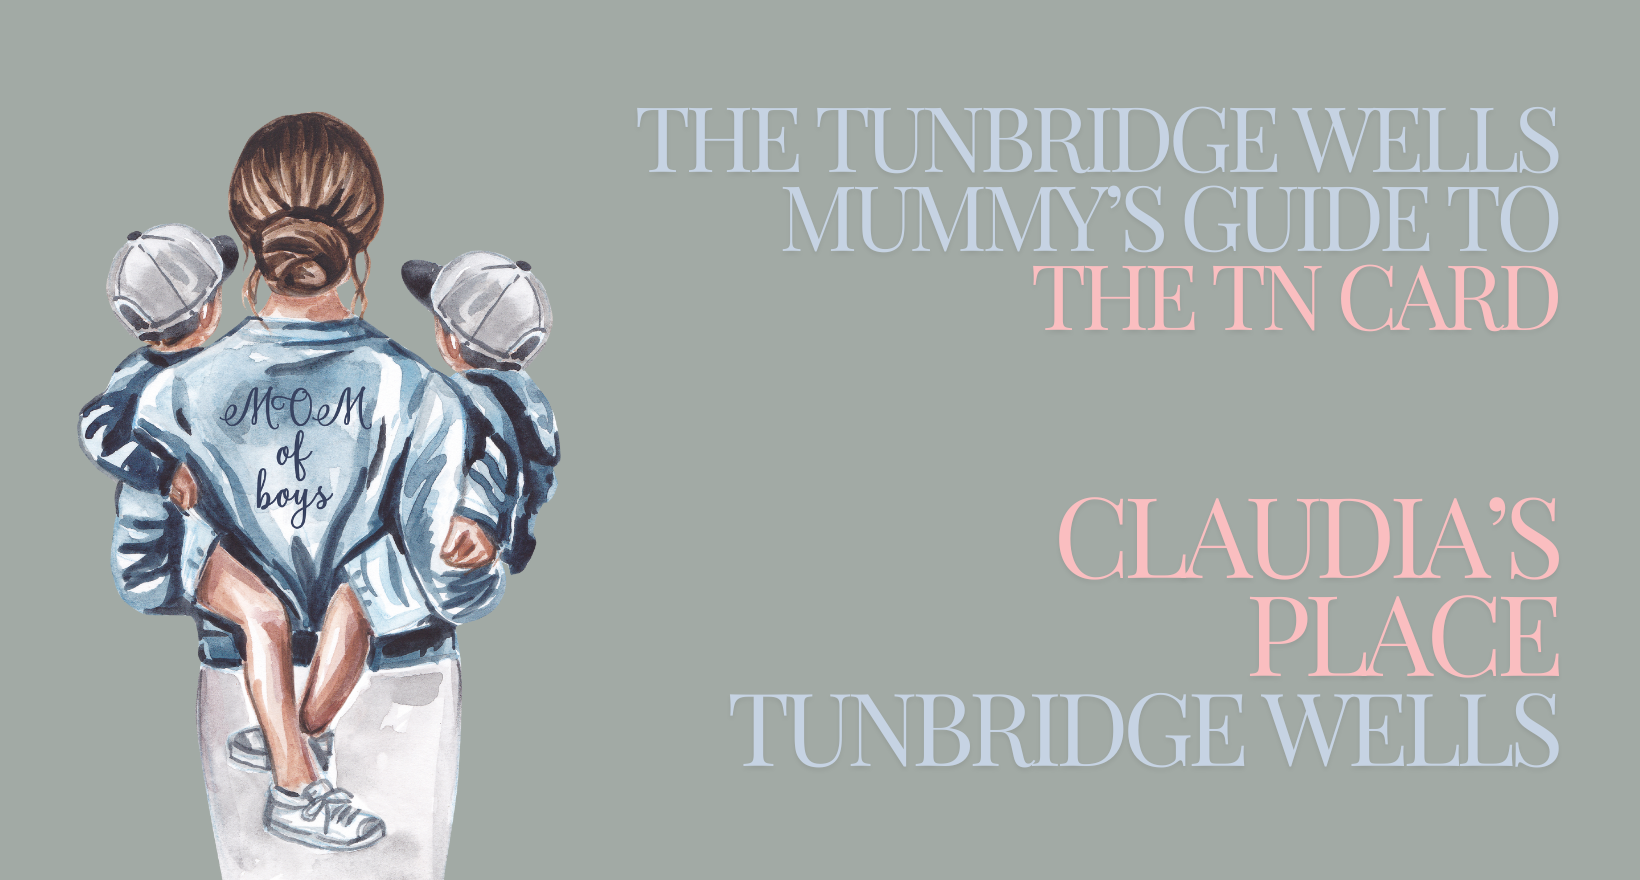 TW Mummy Visits Claudia's Place - image